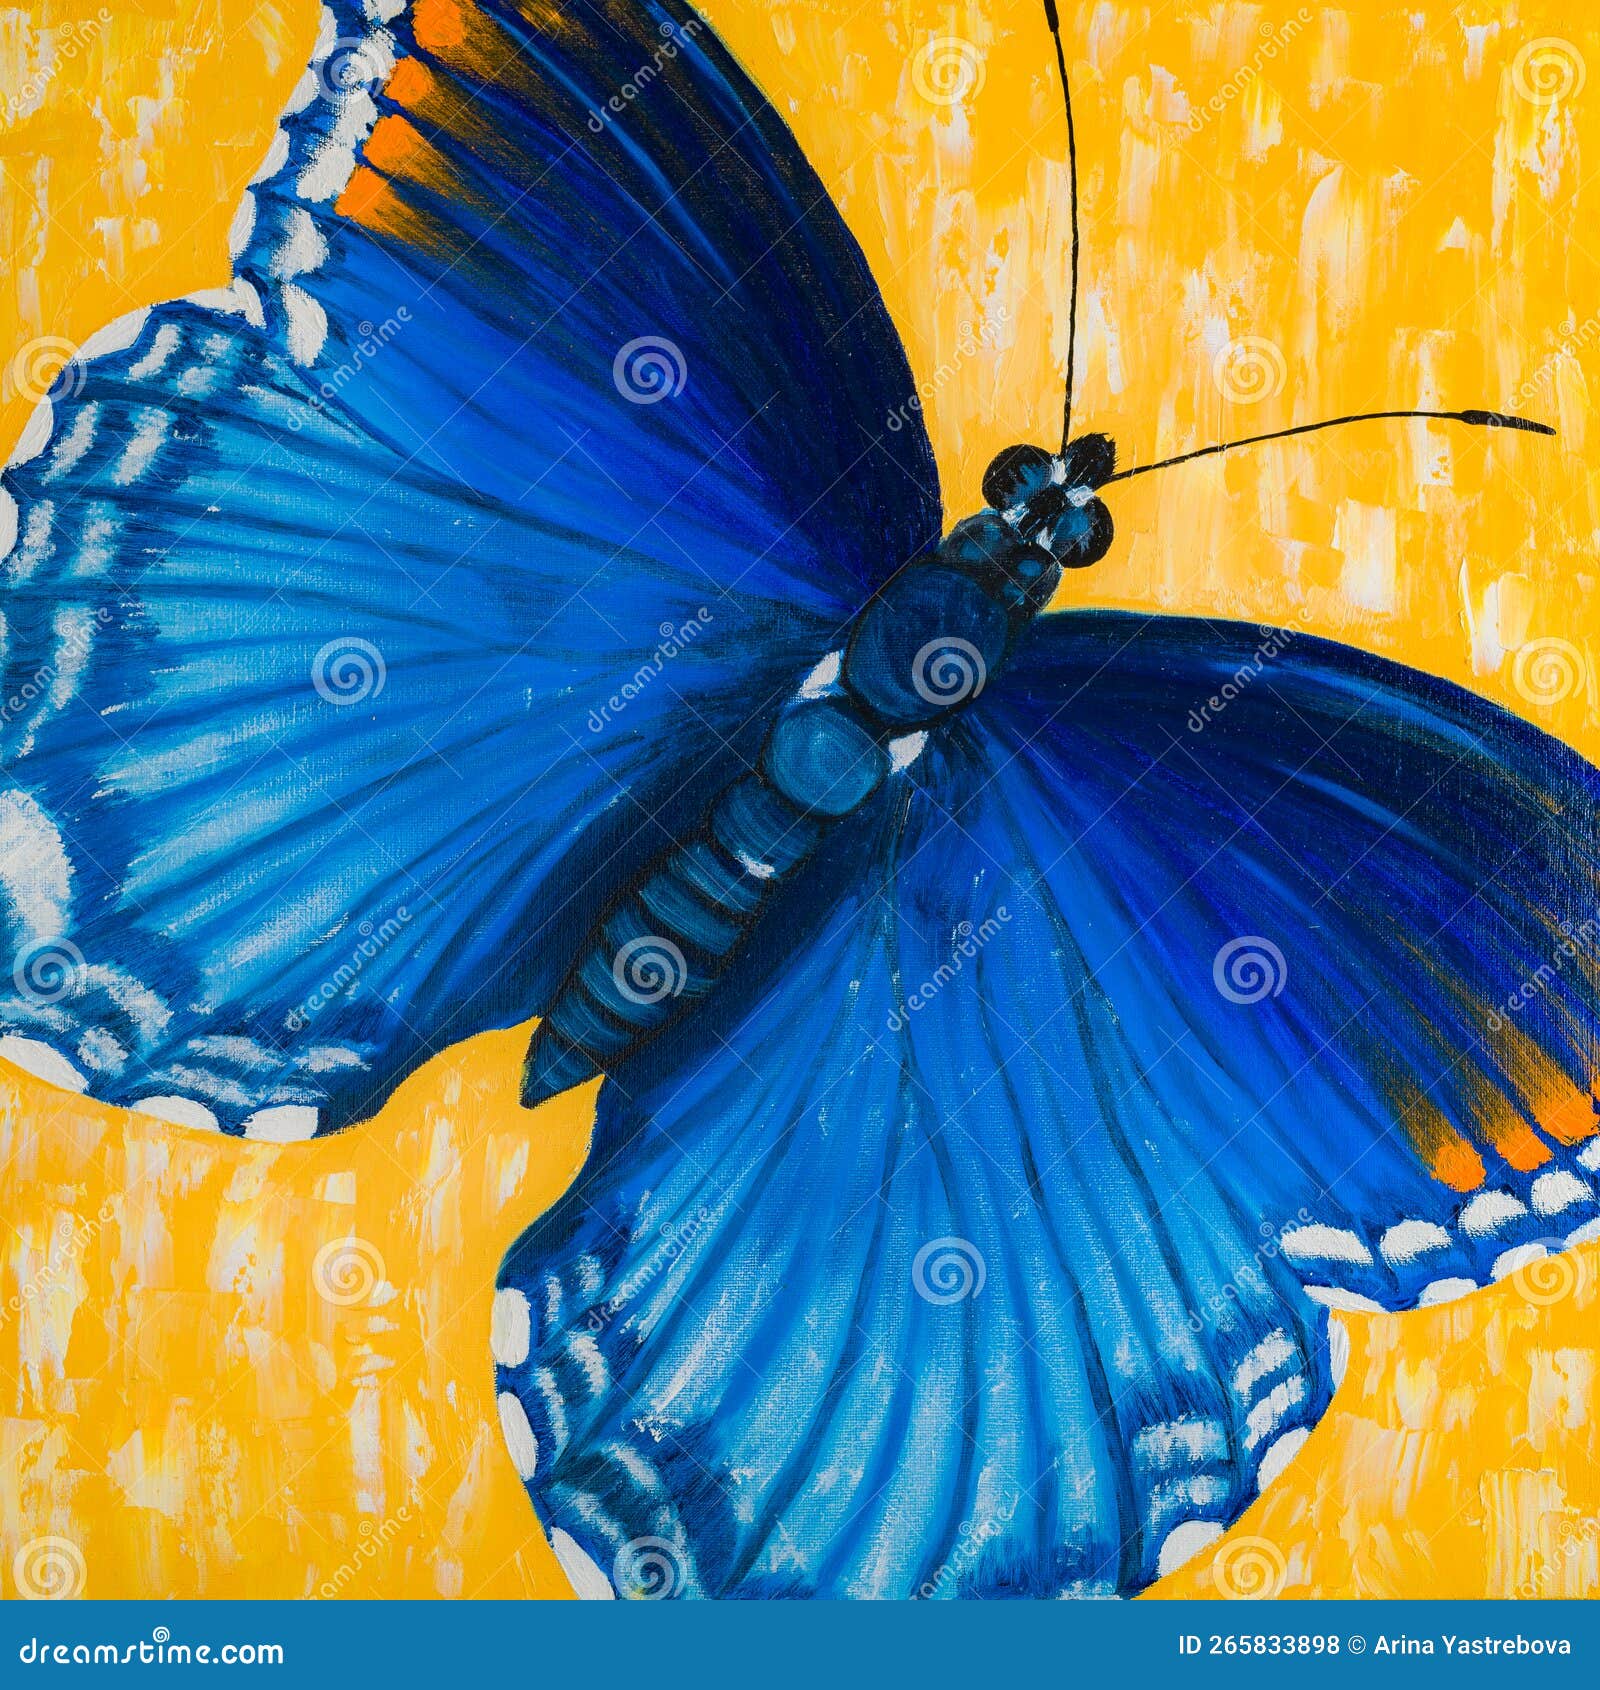 abstract blue tropical morpho butterfly on yellow background, oil painting